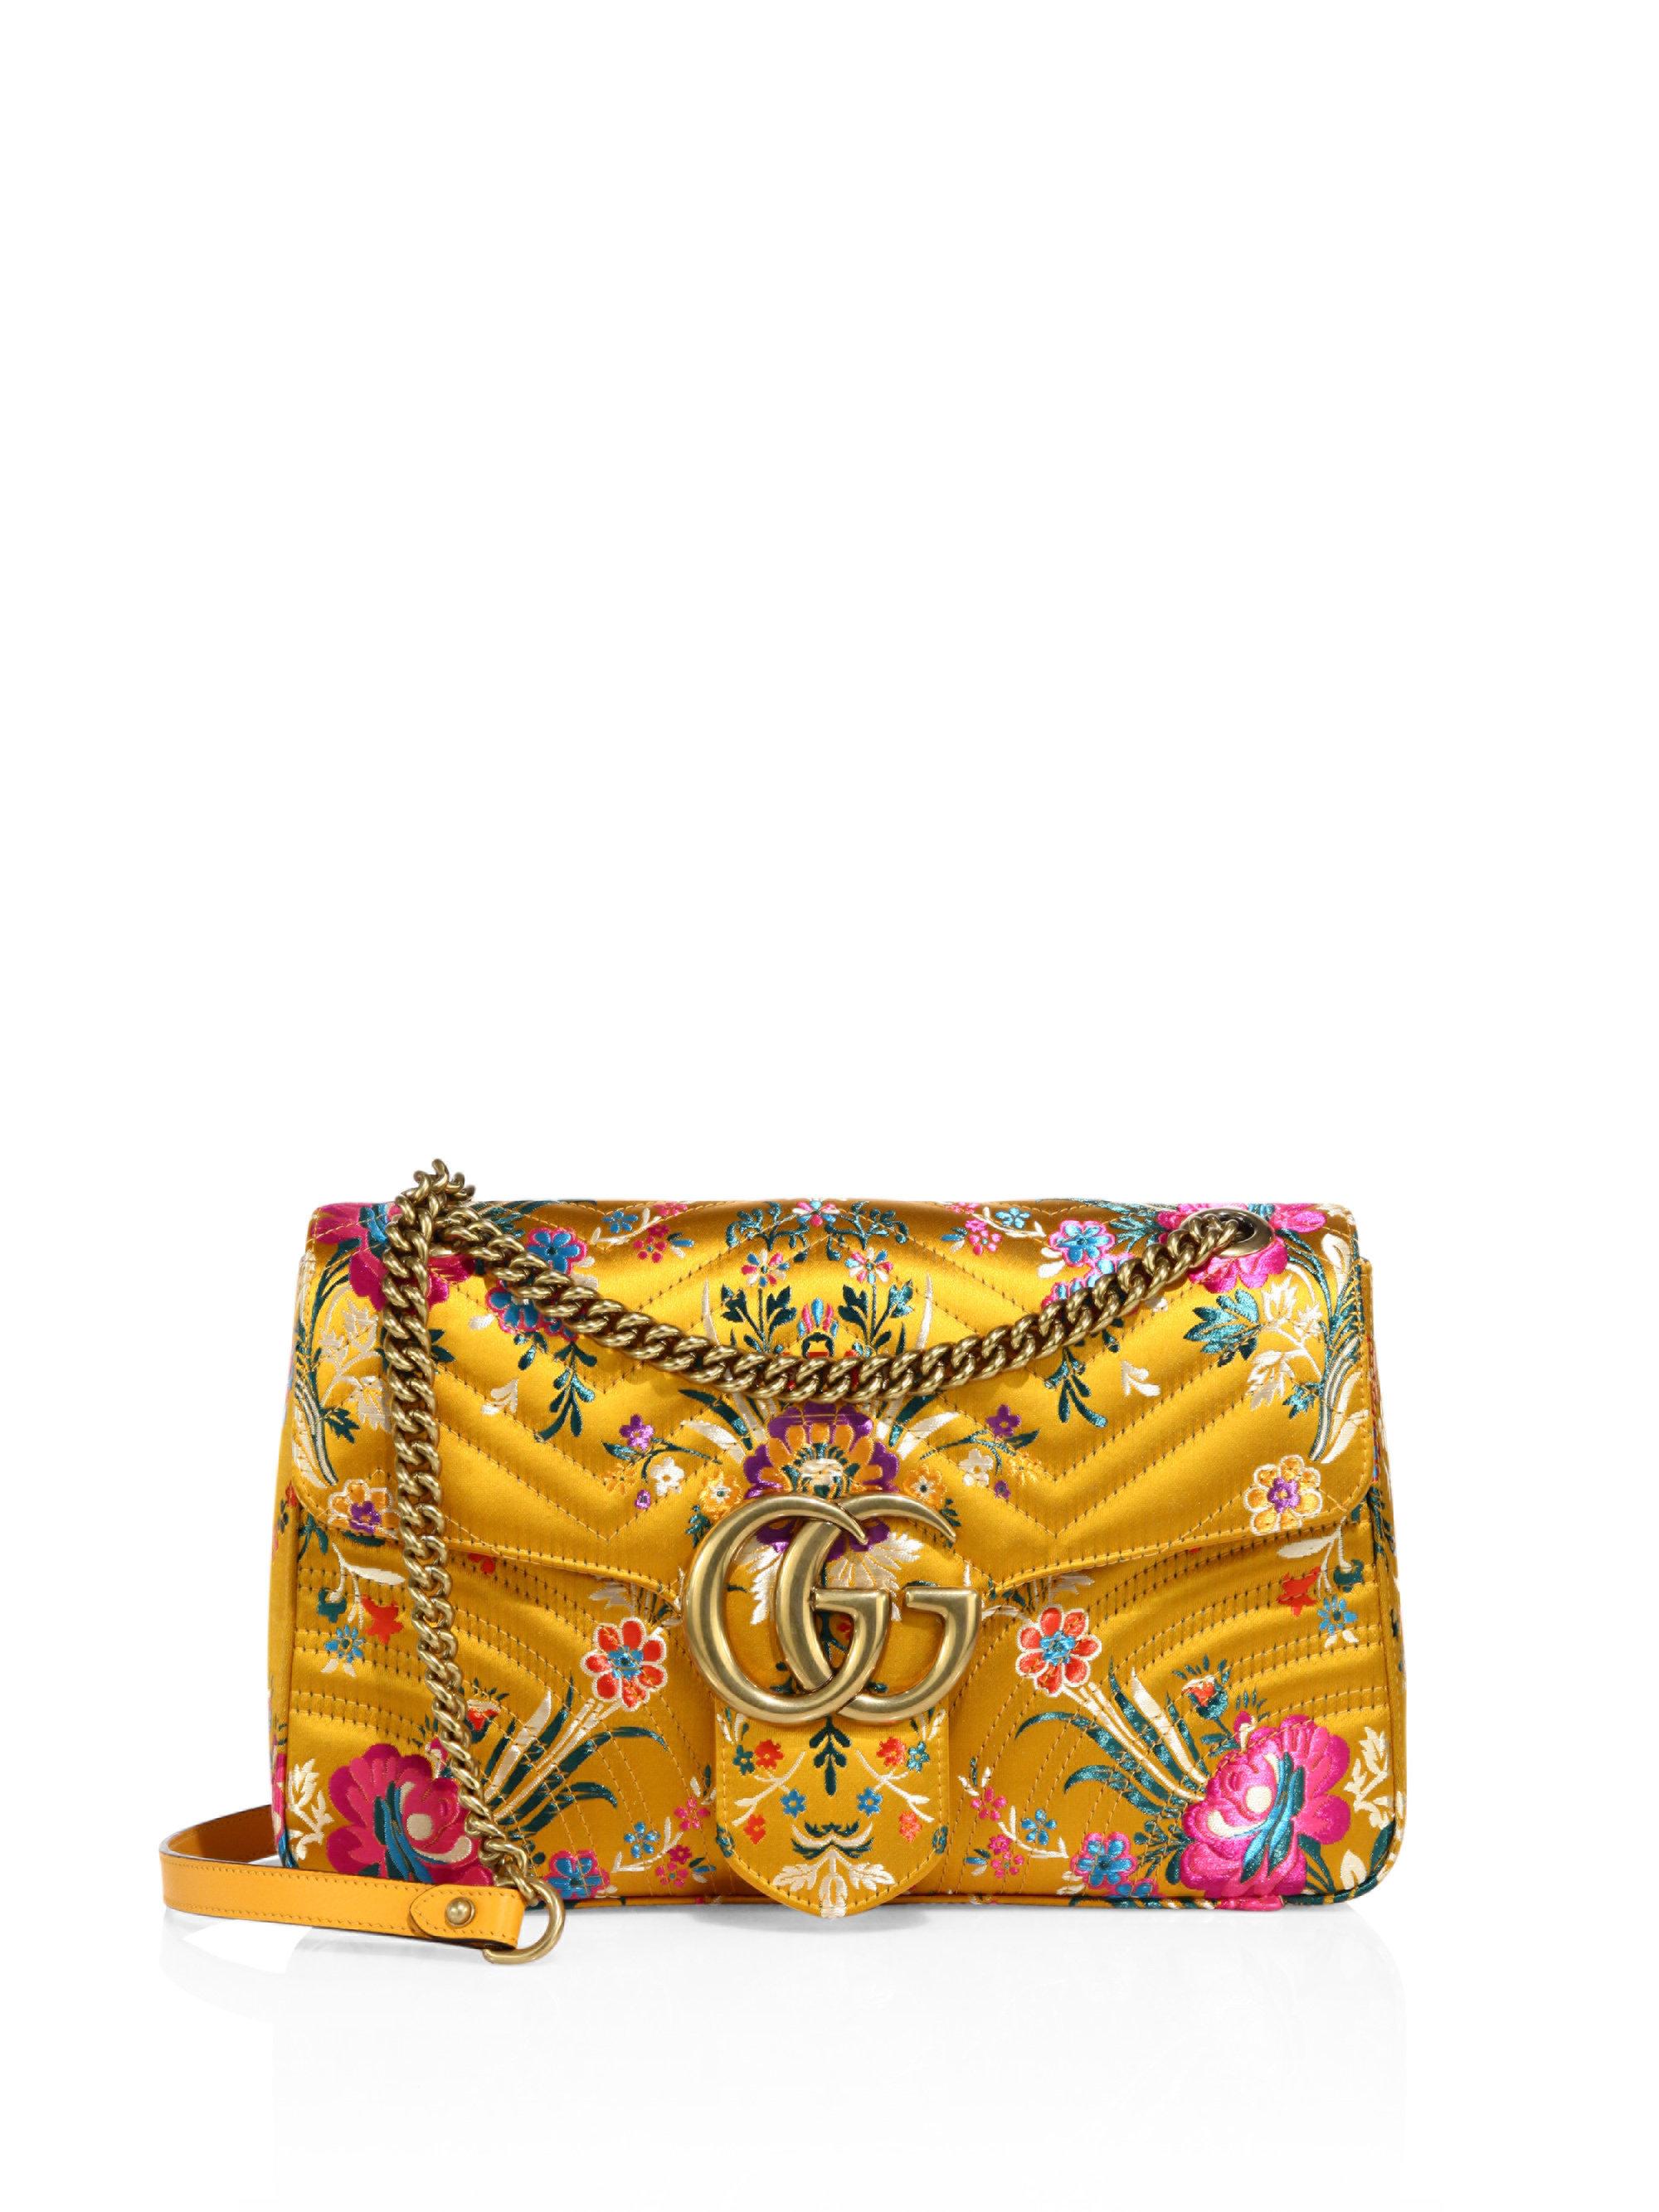 Gucci Suede Small Gg Marmont Matelasse Floral Jacquard Chain Shoulder Bag  in Lemon (Yellow) - Lyst